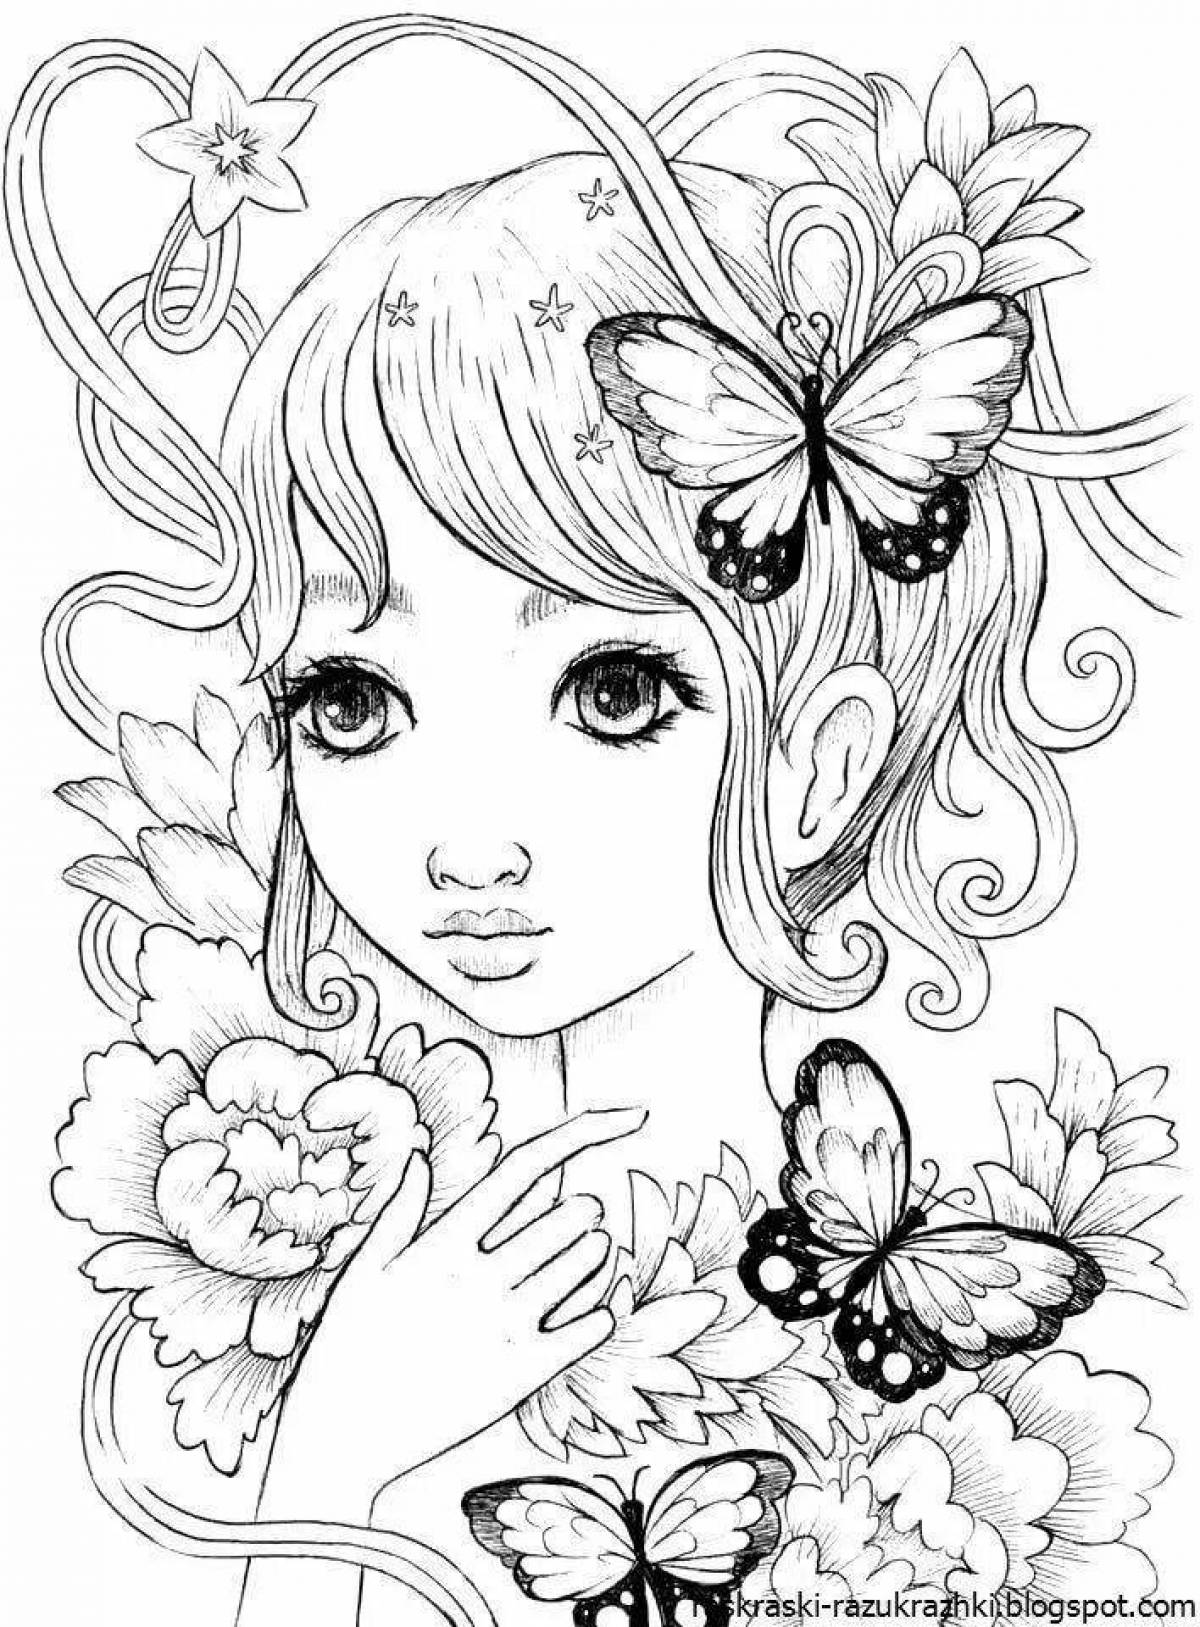 Playful coloring book for girls 9-10 years old